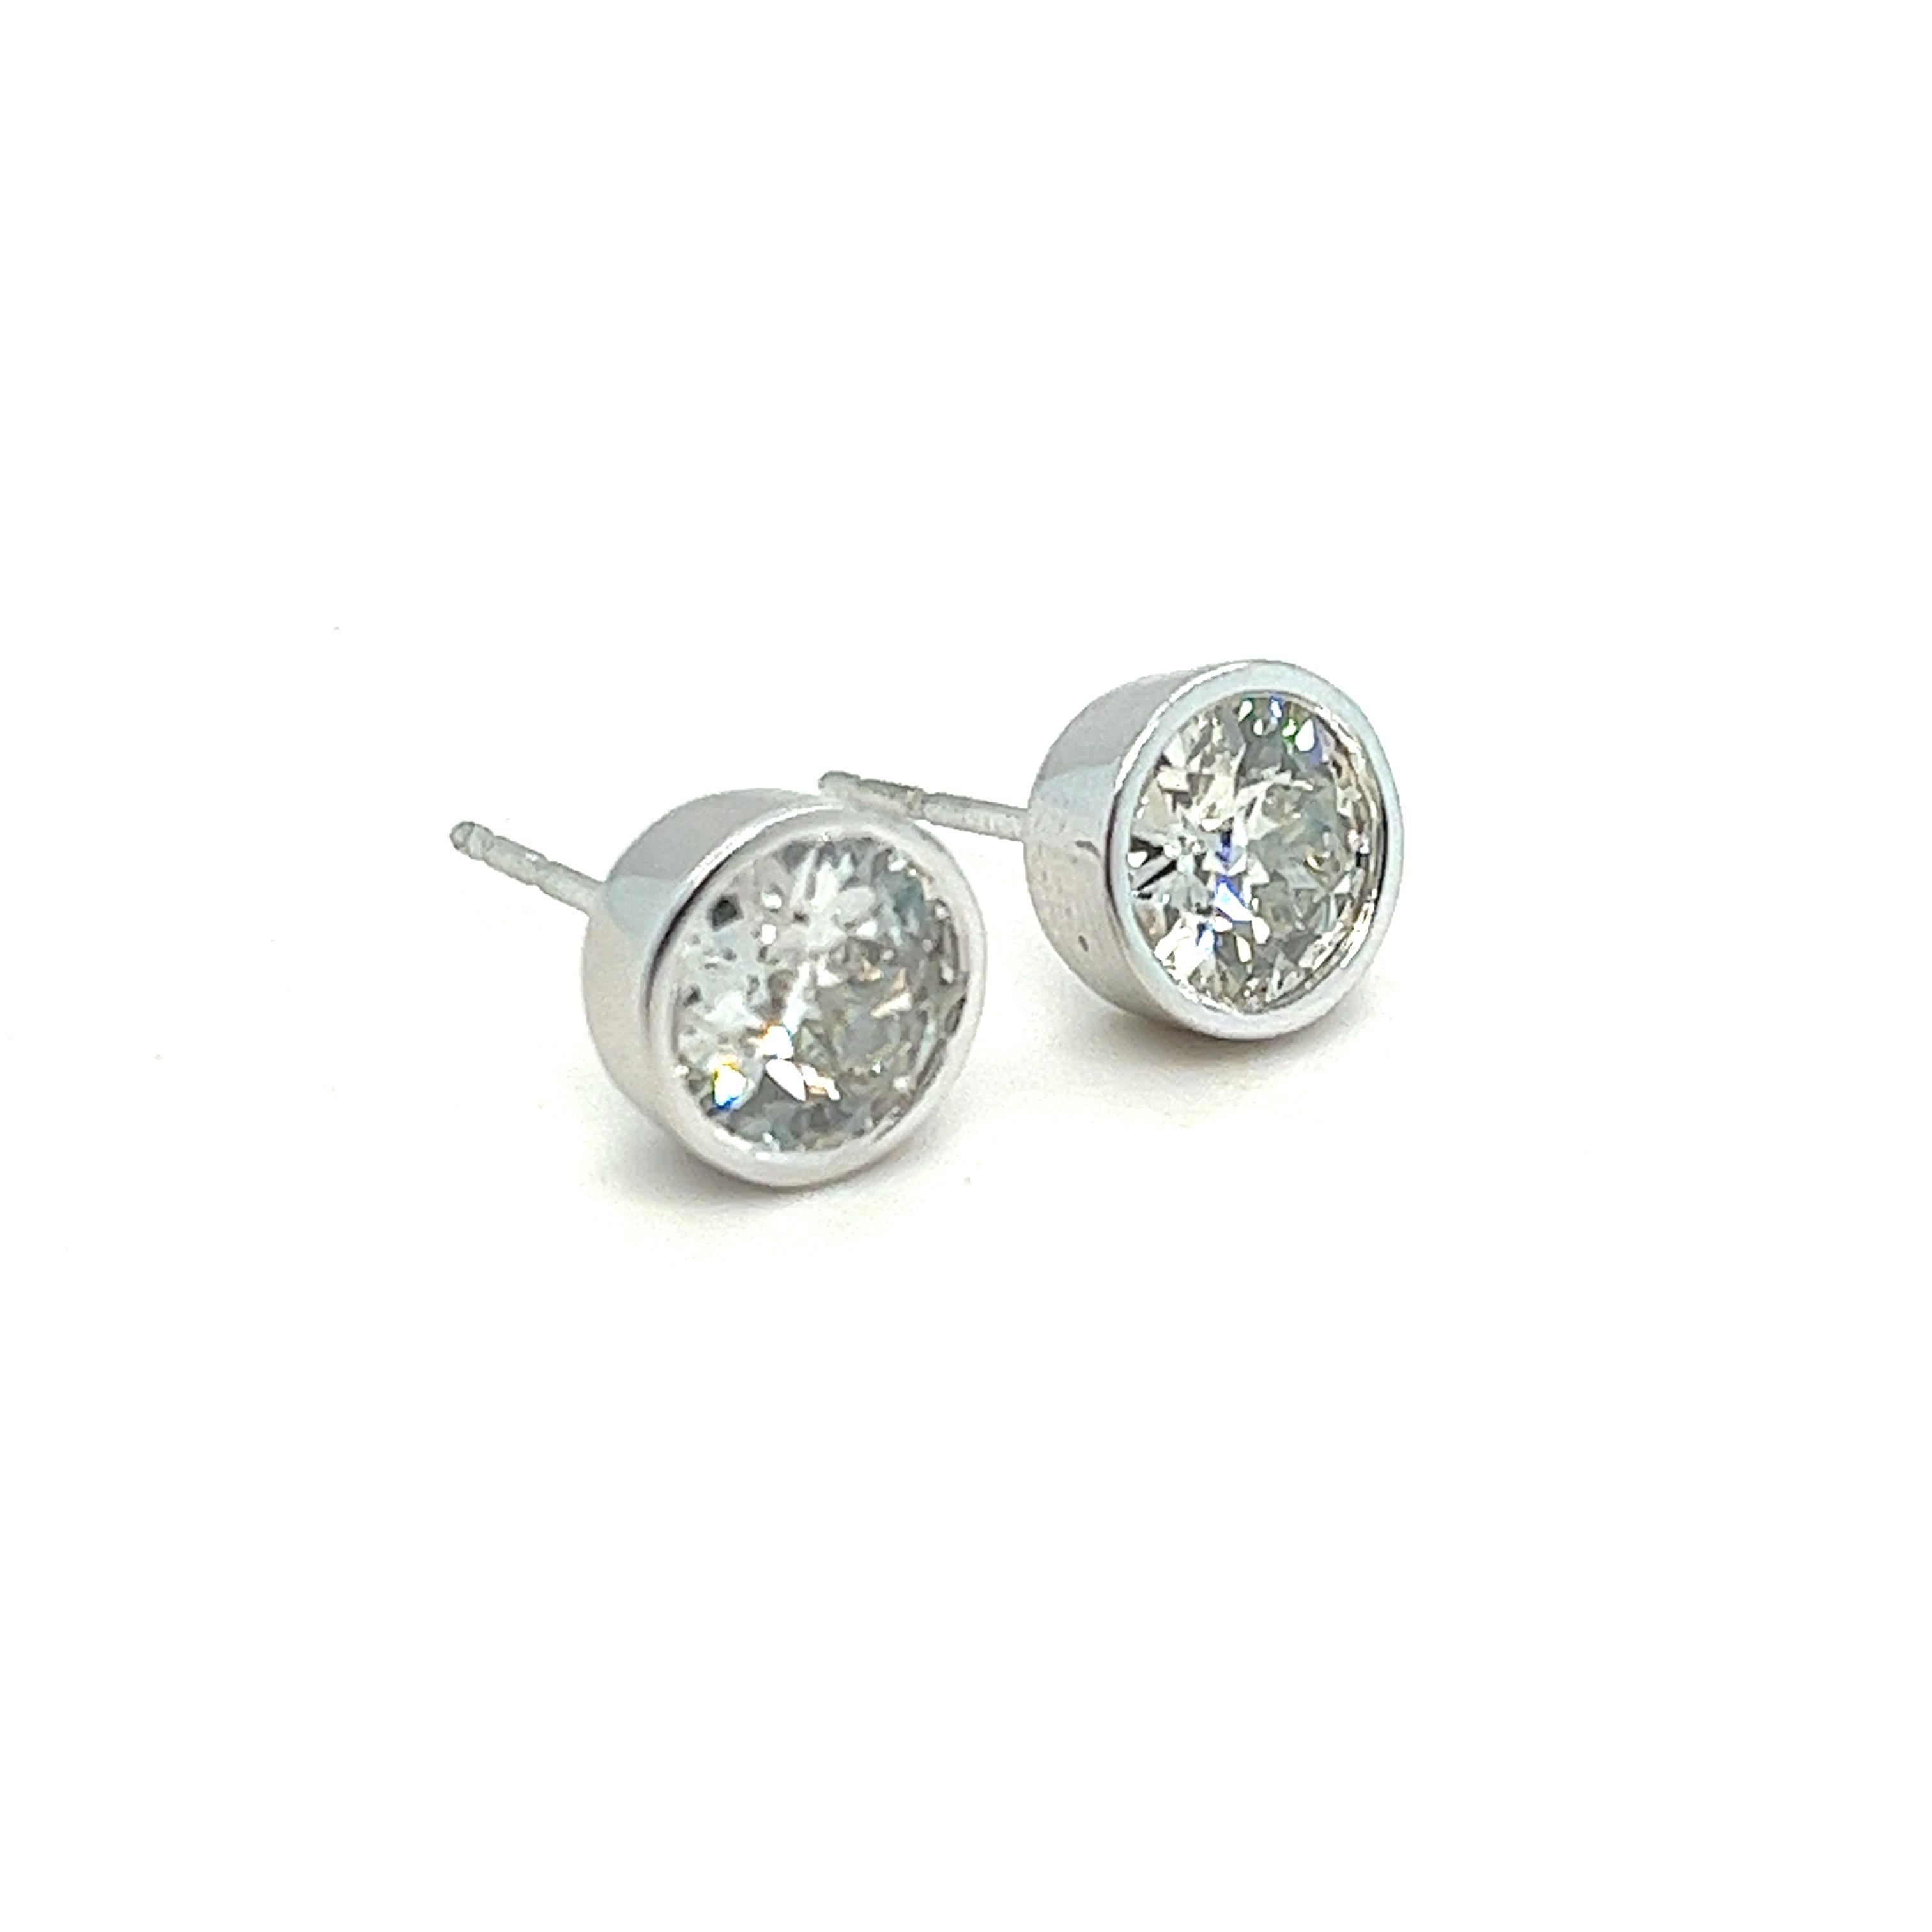 2 Carats Old European Cut Diamonds Platinum Stud Earrings In Excellent Condition For Sale In Miami, FL